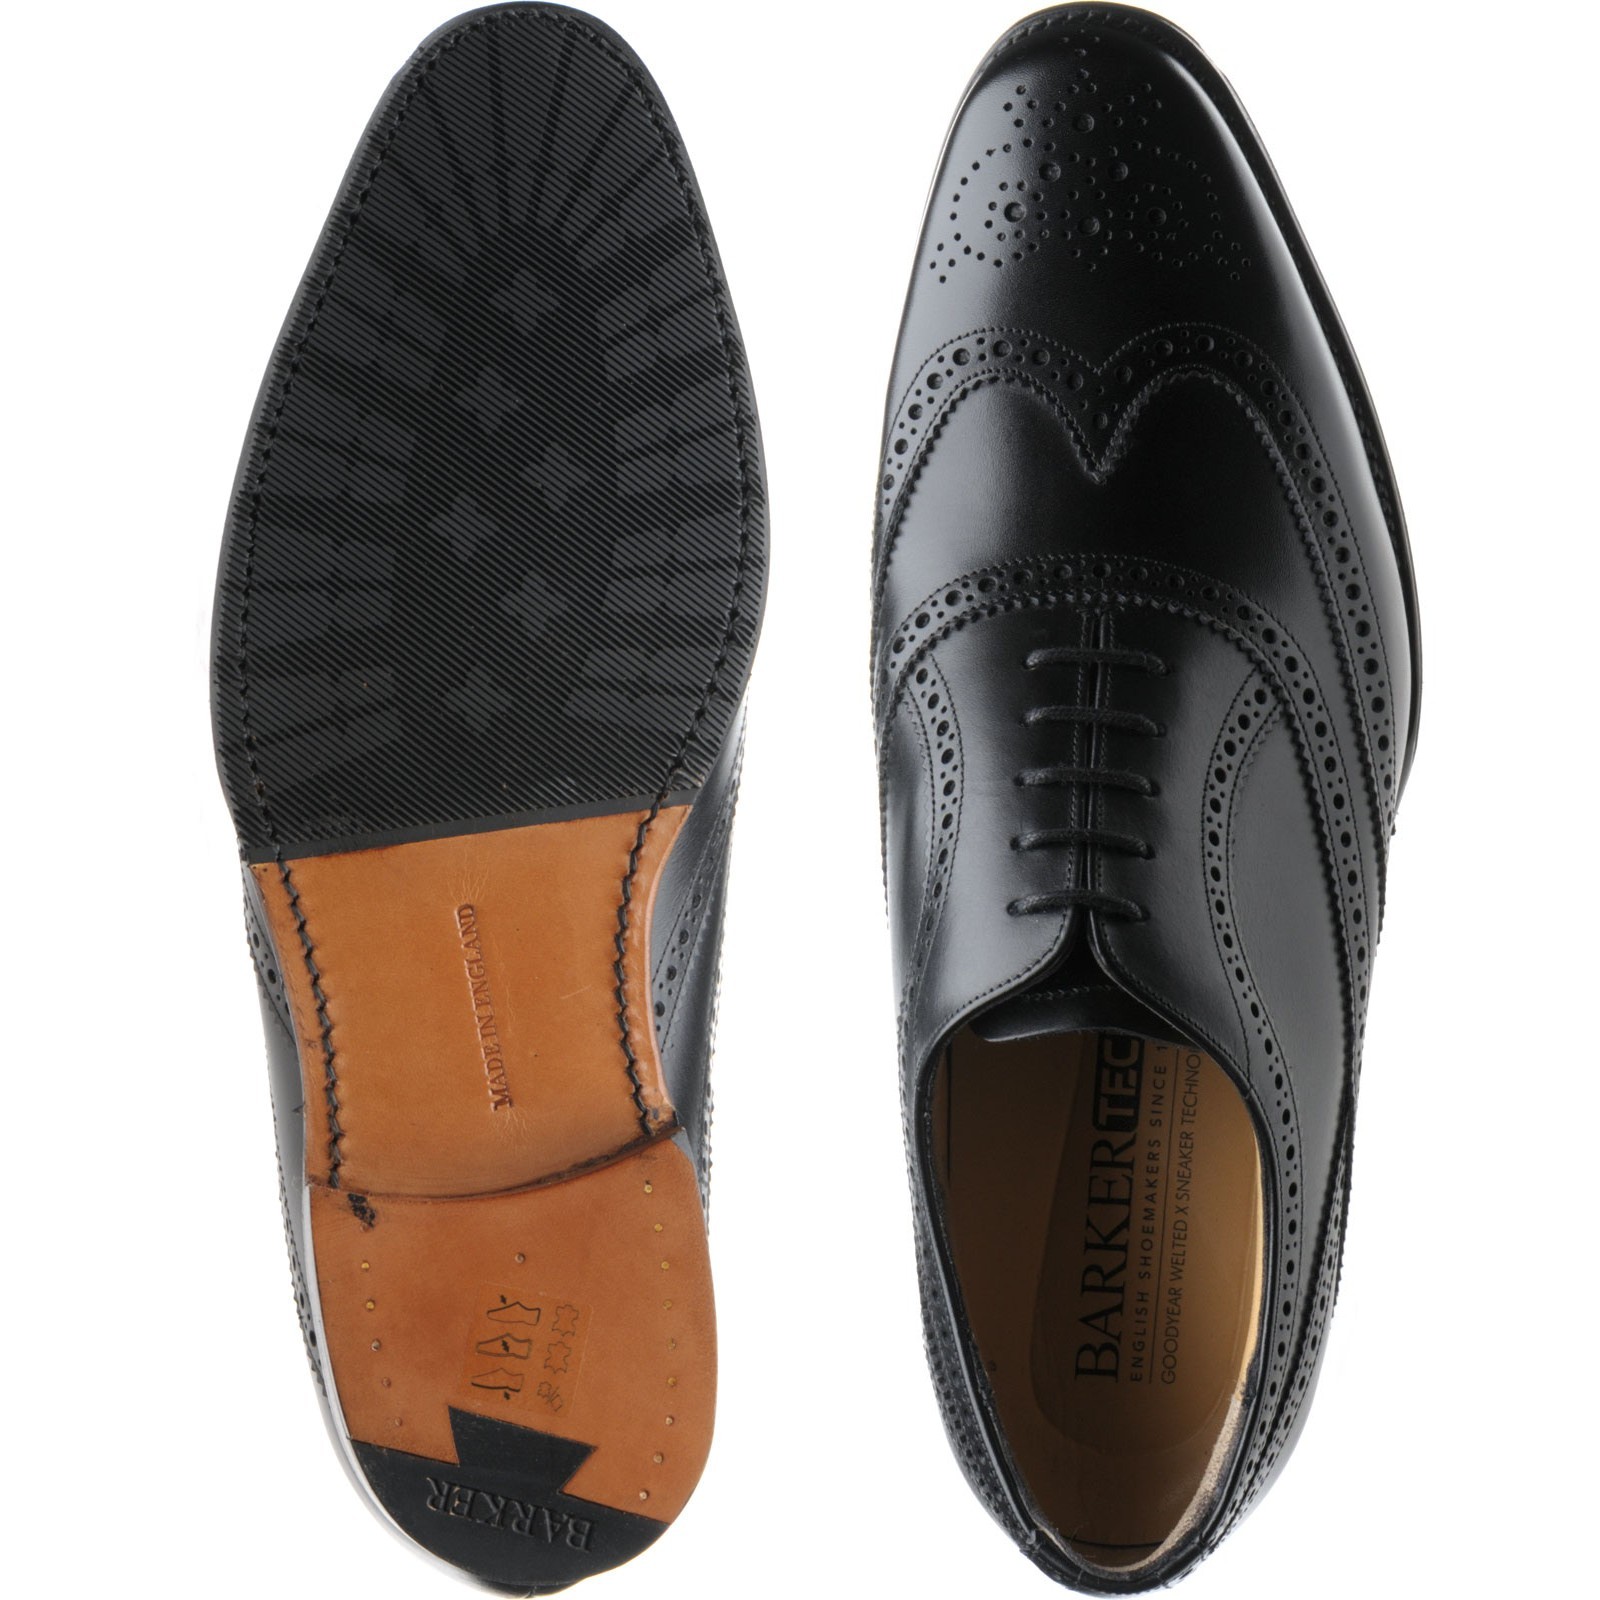 Barker shoes | Barker Tech | Turing hybrid-soled brogues in Black Calf ...